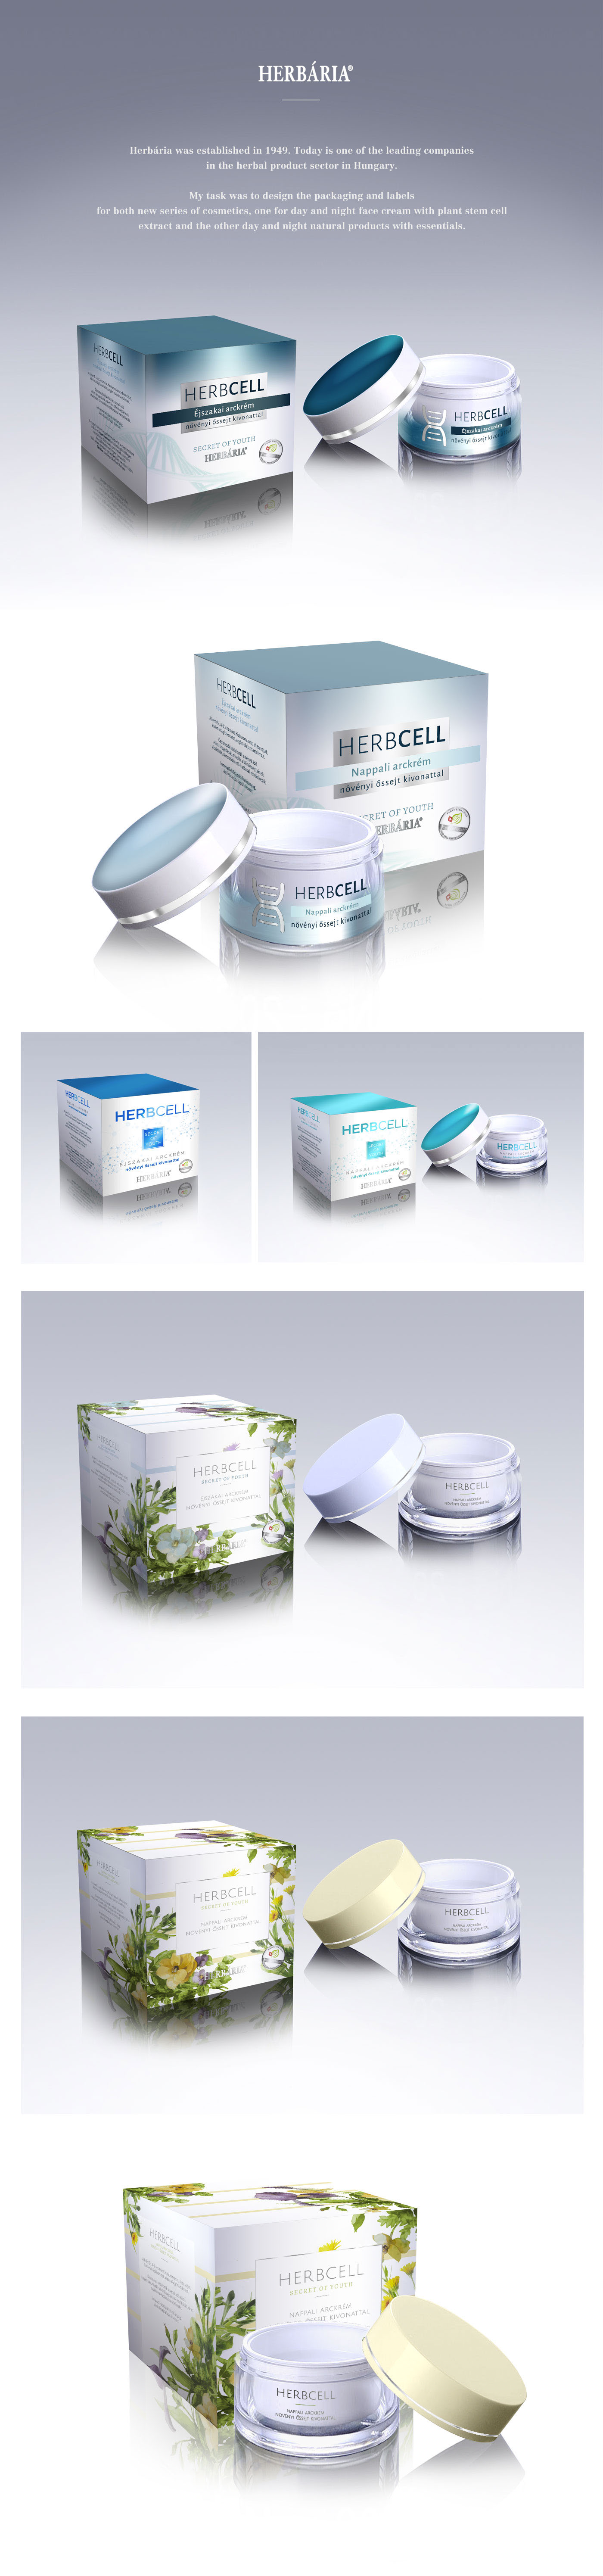 package Cosmetic herbal package design  face cream